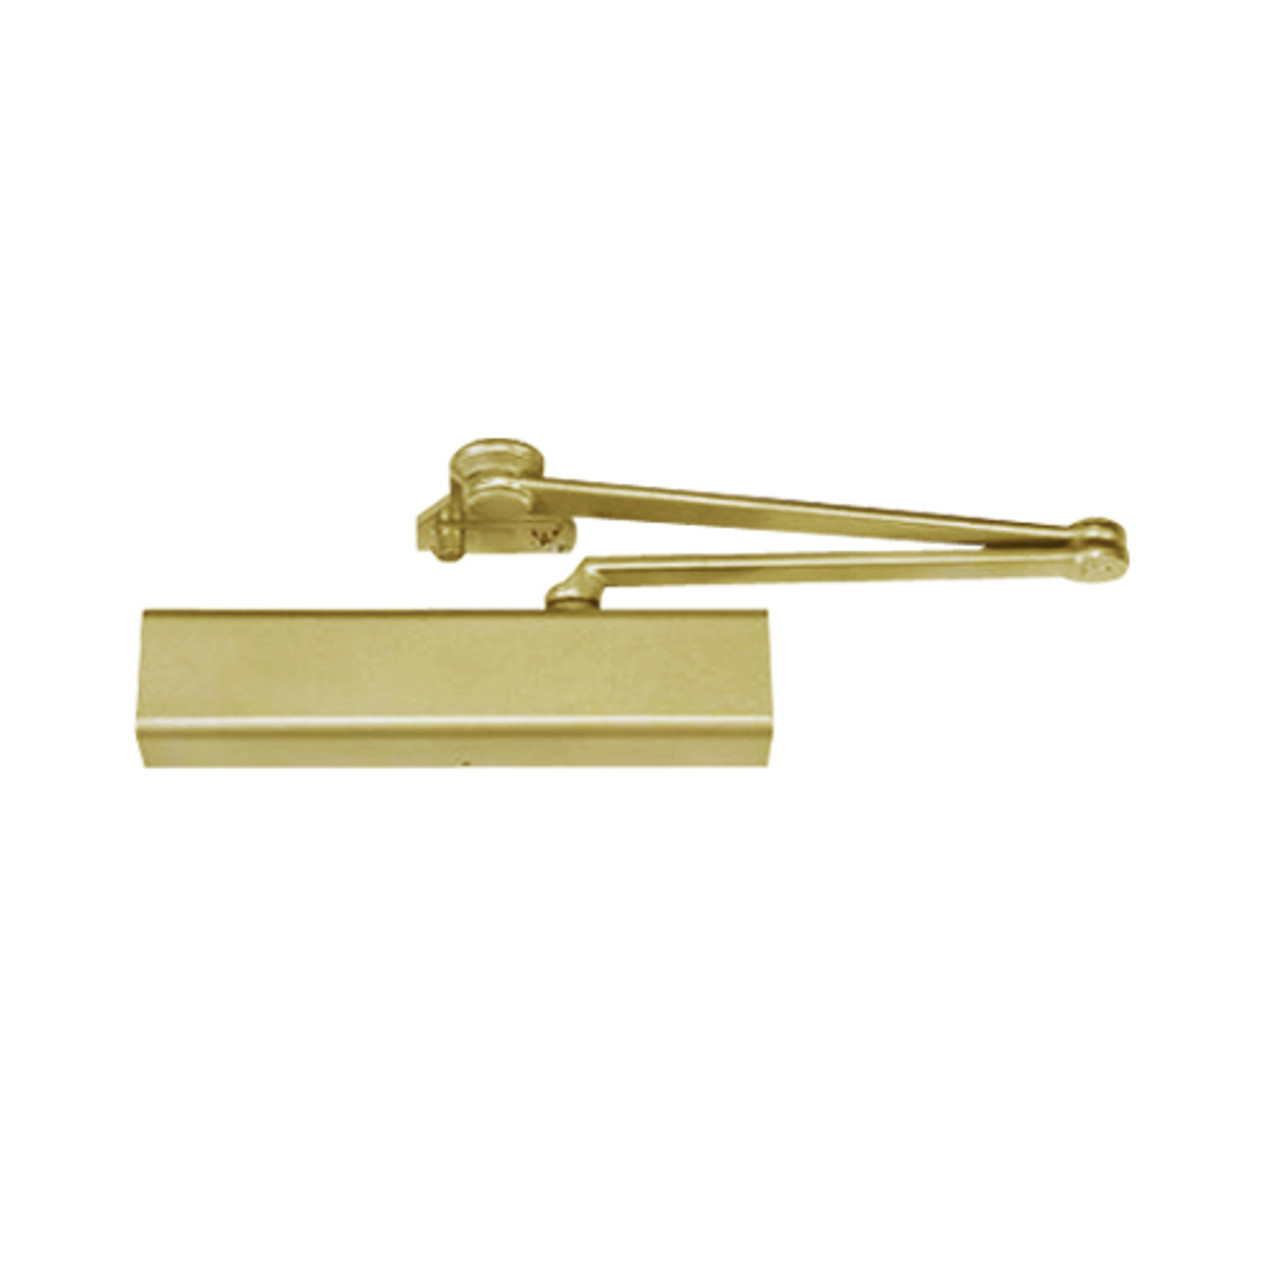 CLP8501TM-696 Norton 8000 Series Full Cover Hold Open Door Closers with CloserPlus Arm in Gold Finish